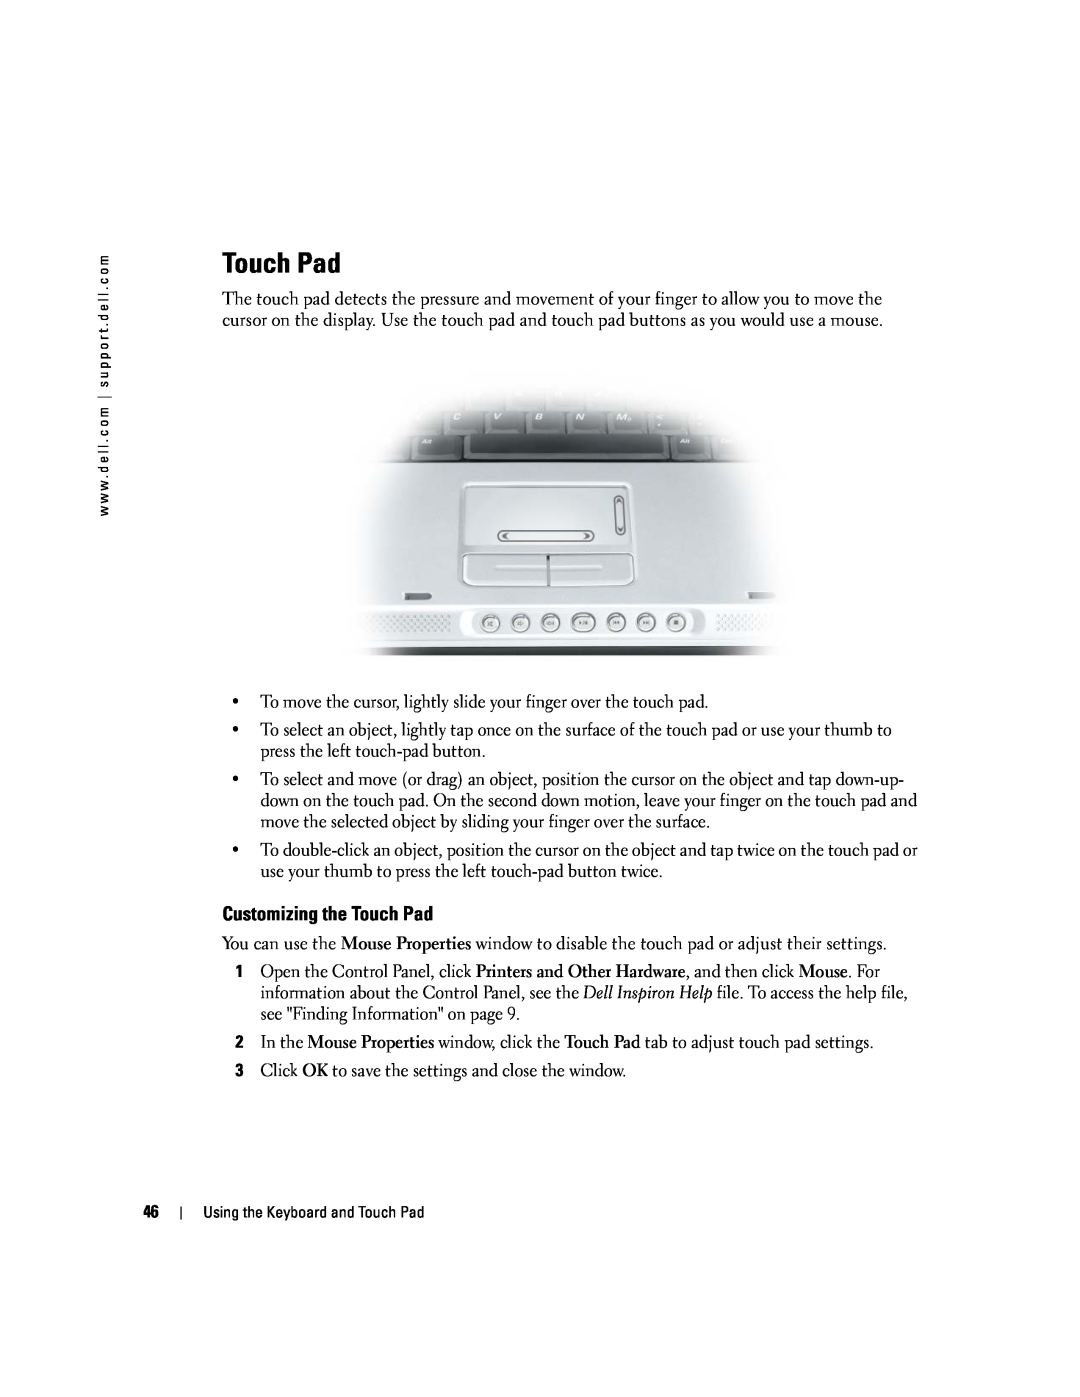 Dell 9300 owner manual Customizing the Touch Pad 